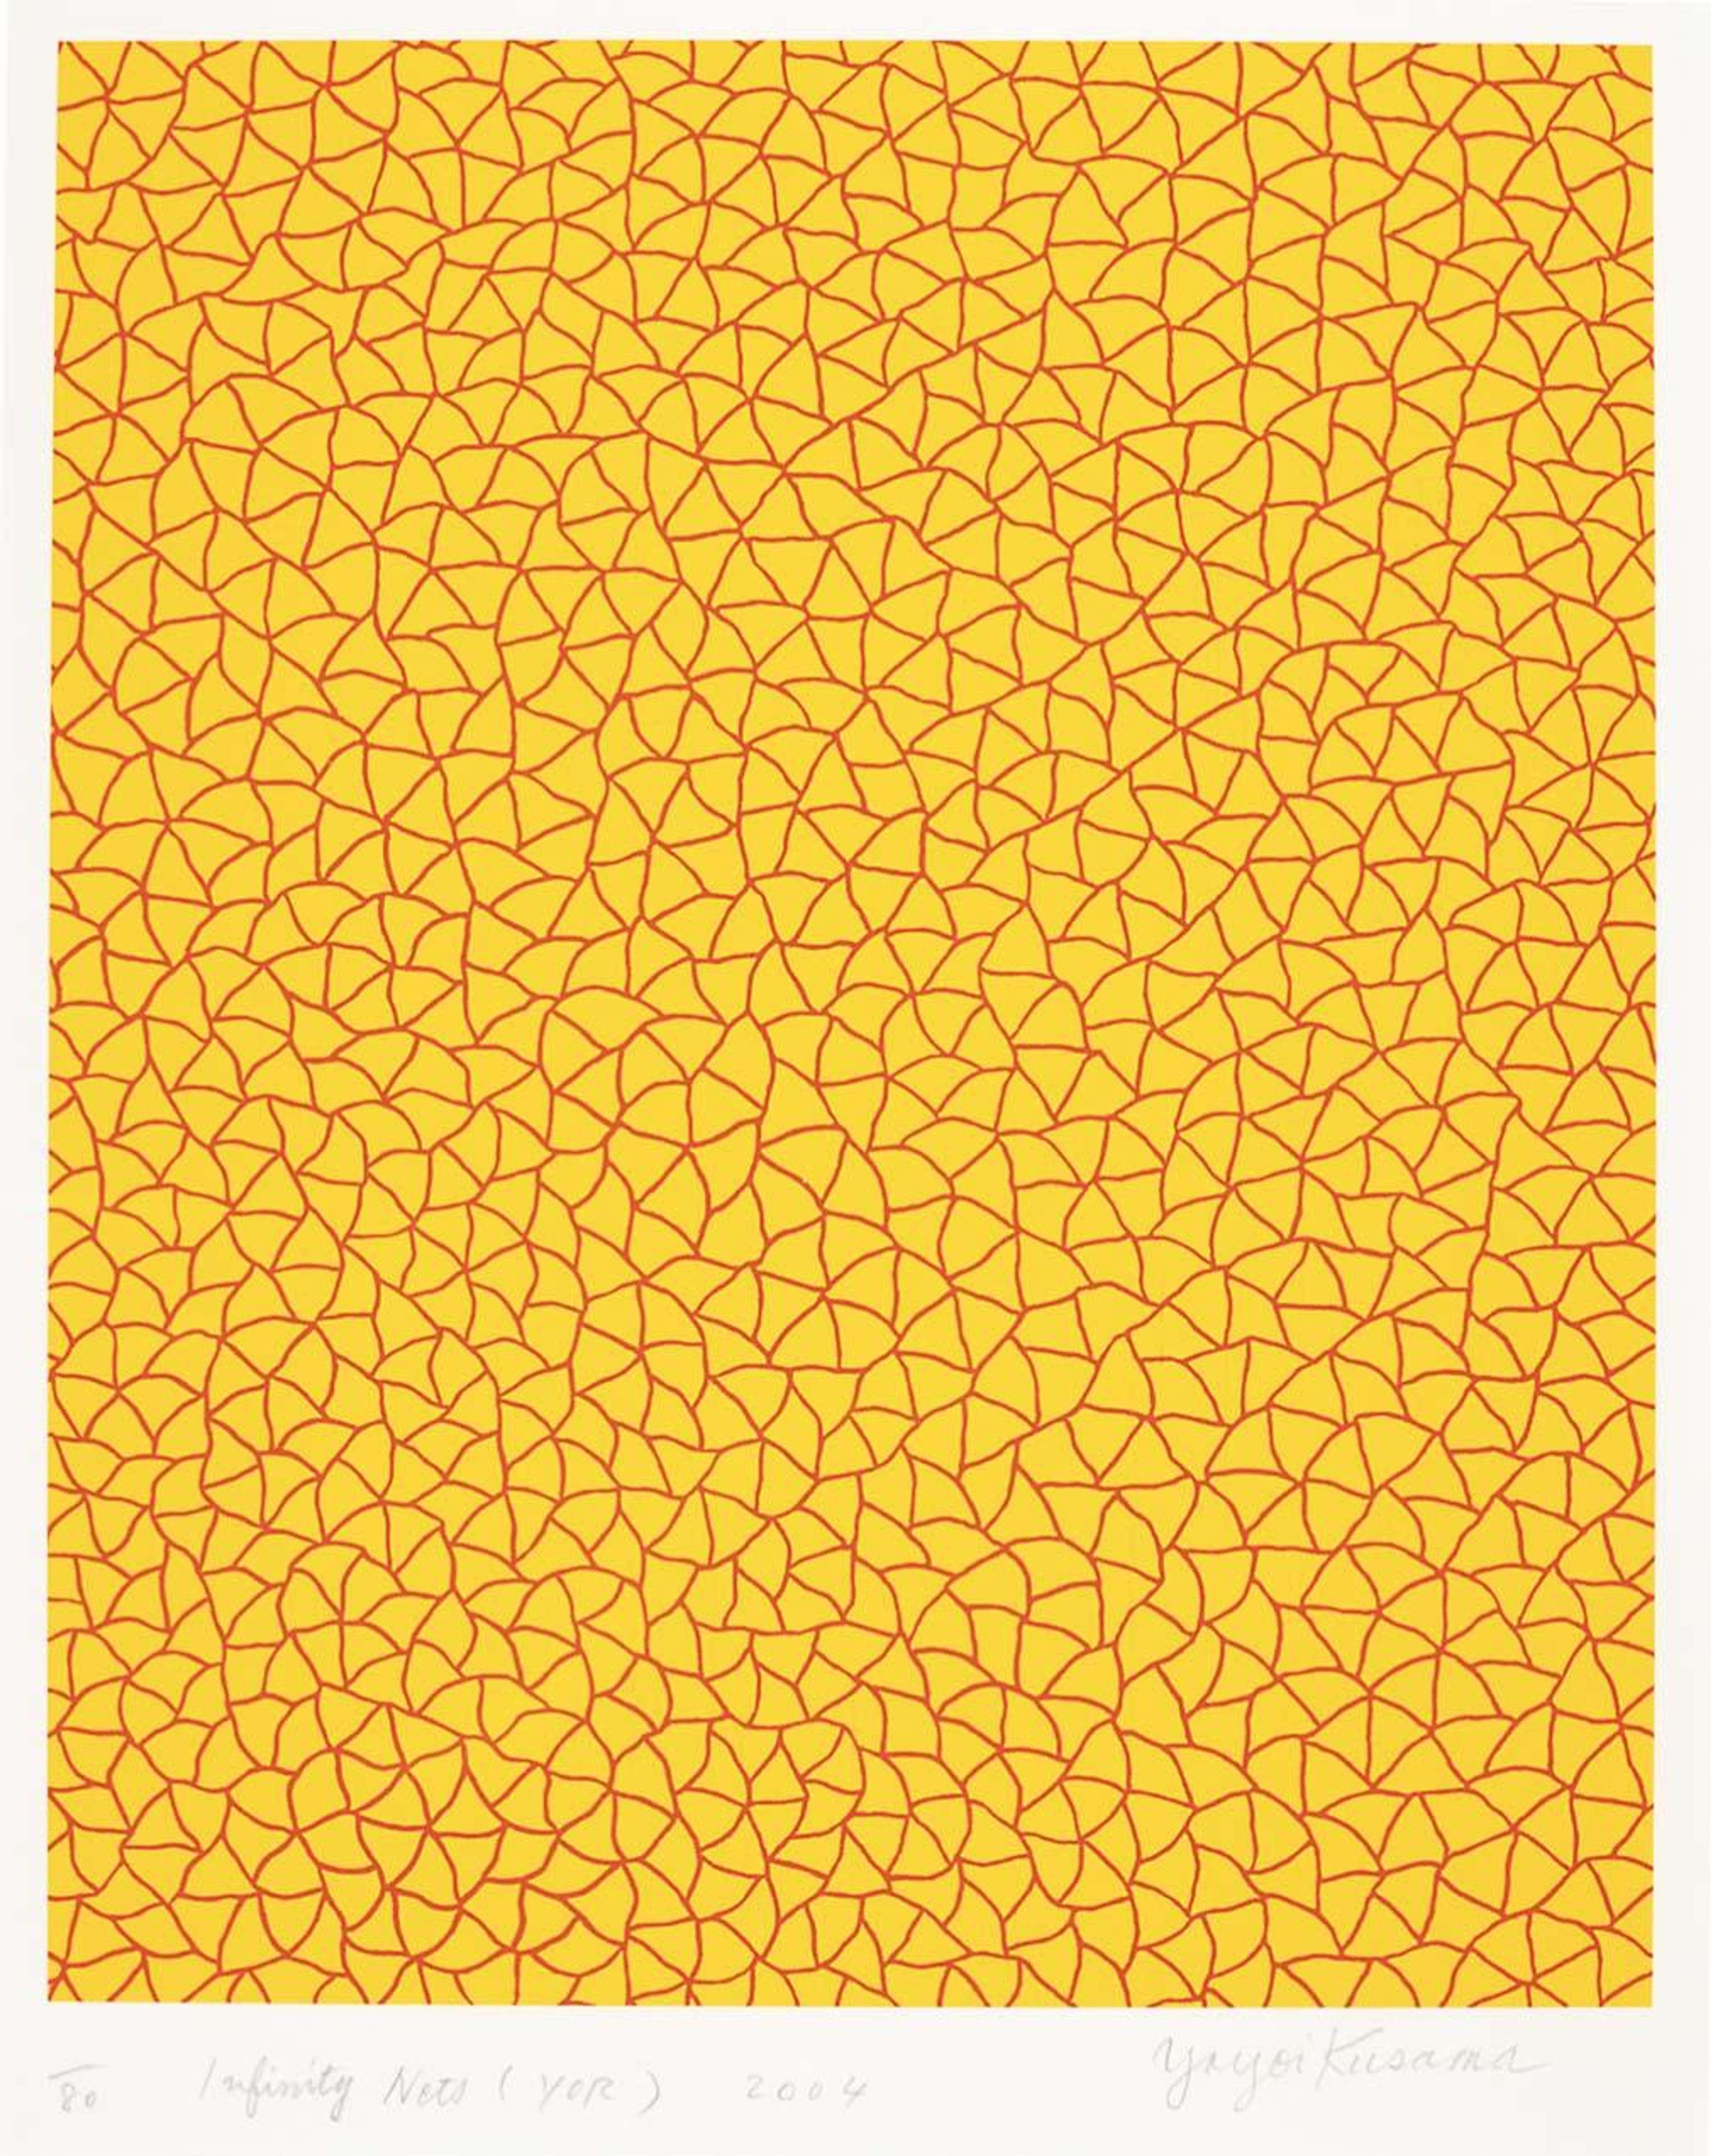 Yayomi Kusama's Infinity Nets (YOR). A screenprint of a continuous, red triangular patten over a yellow background. 